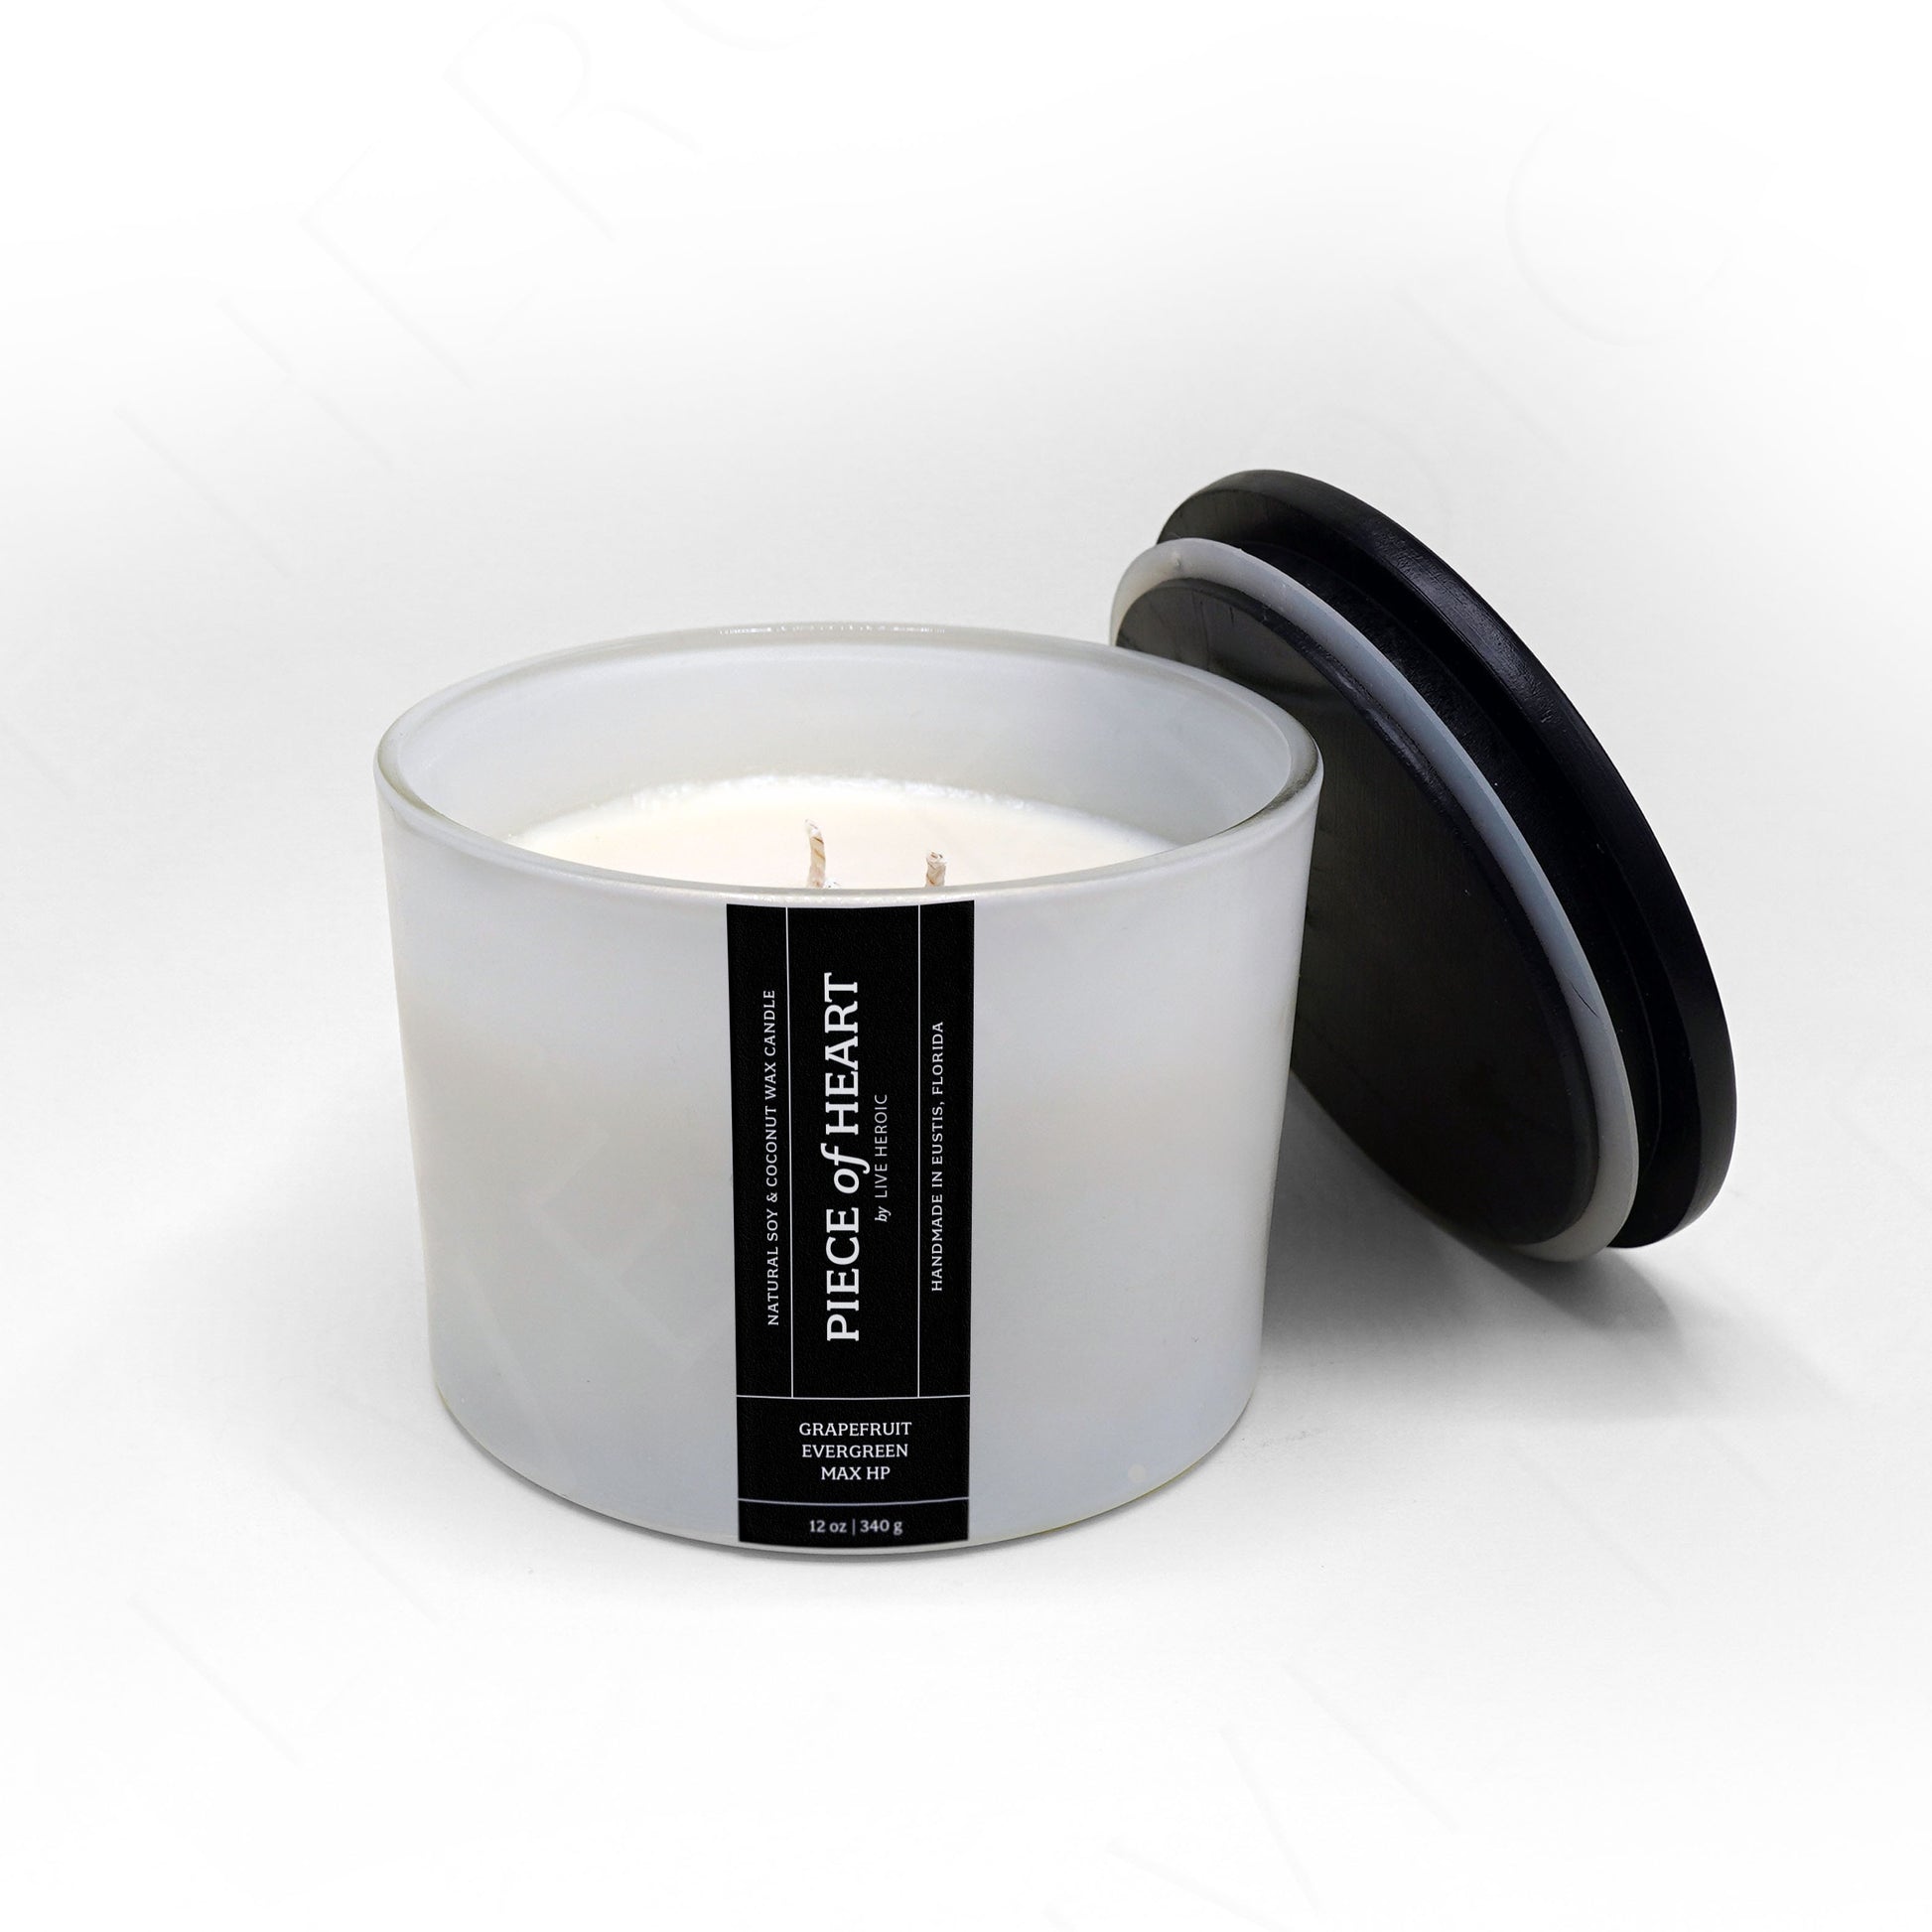 Piece of Heart | 12 oz Scented Coconut & Soy Wax Candle by Live Heroic